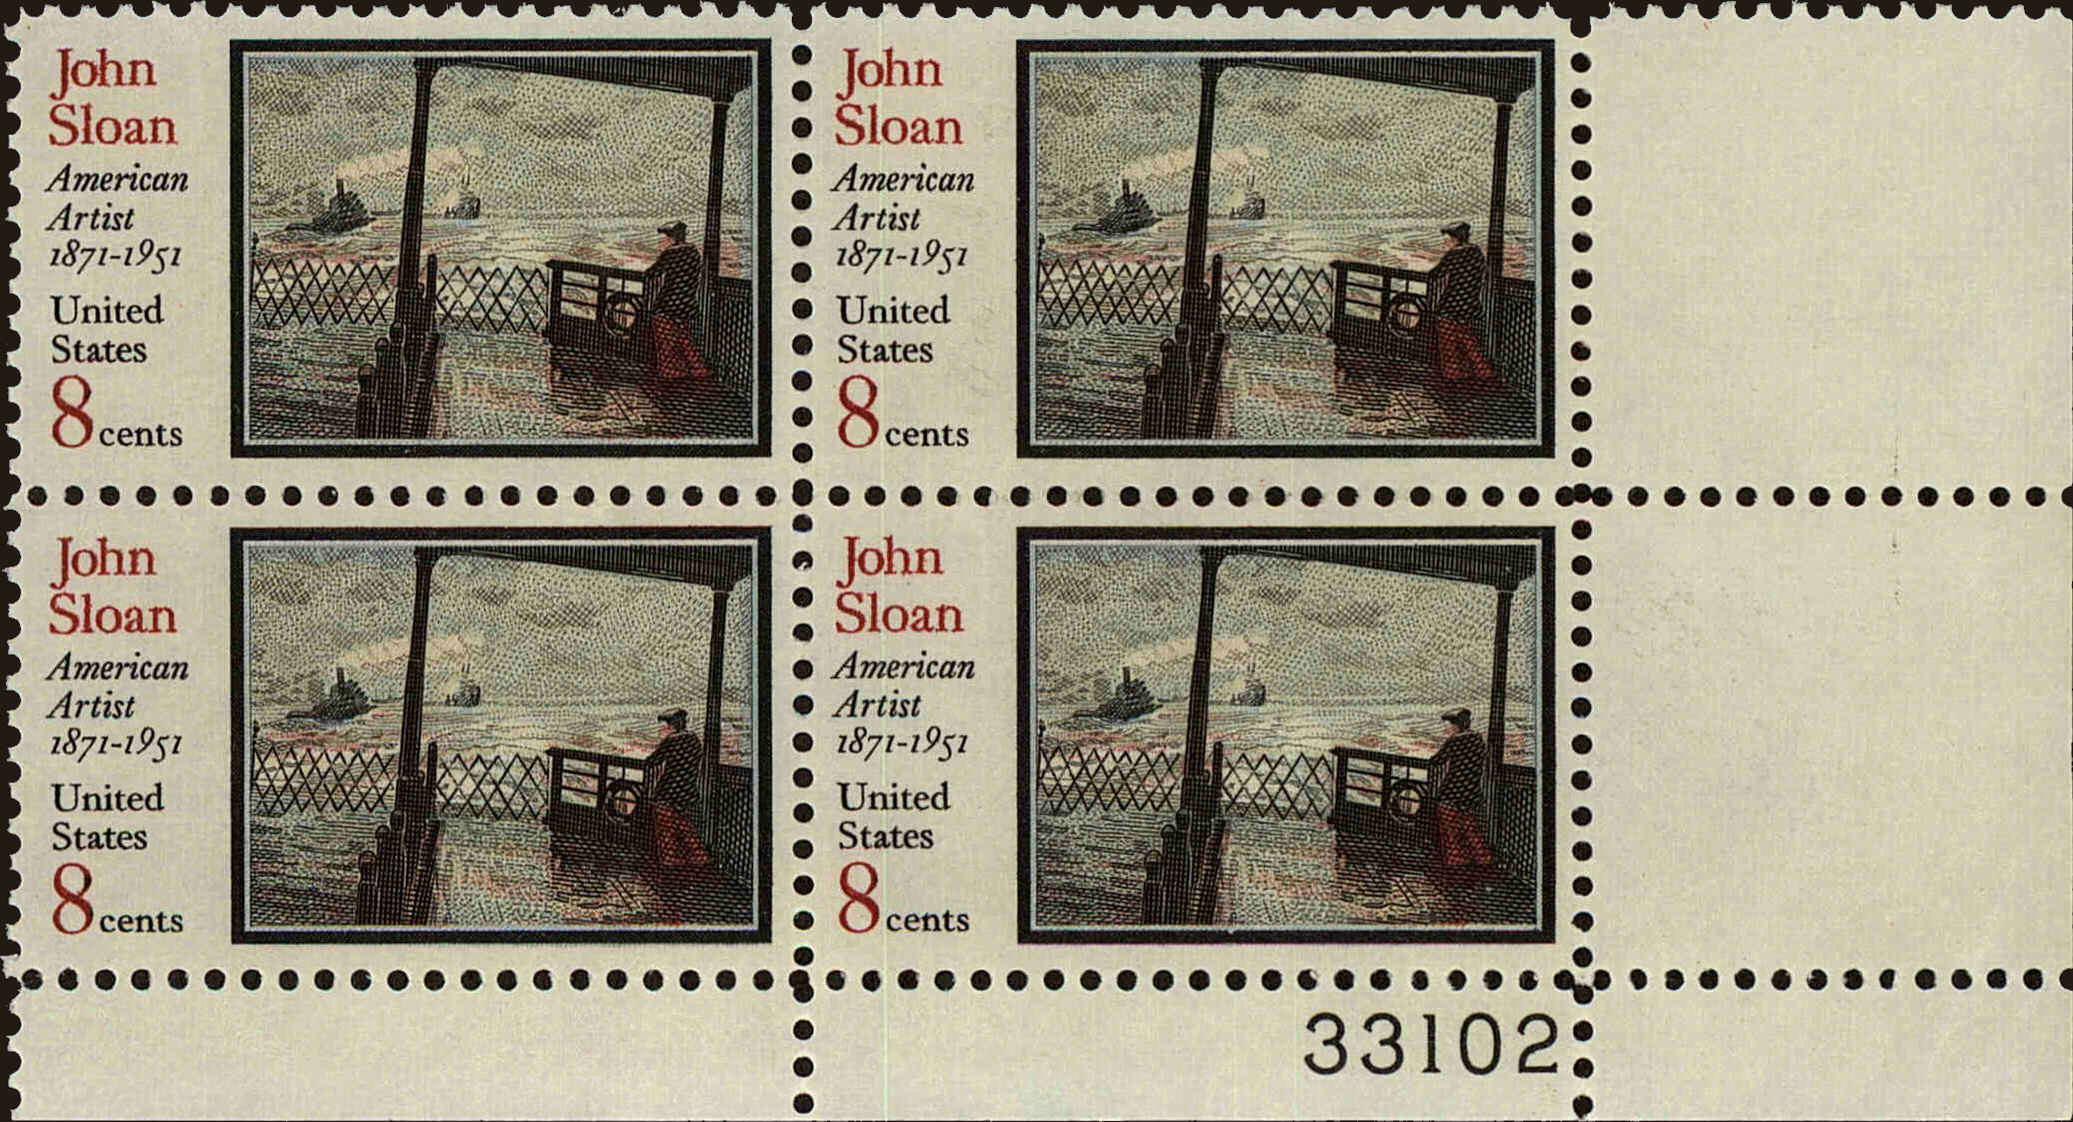 Front view of United States 1433 collectors stamp